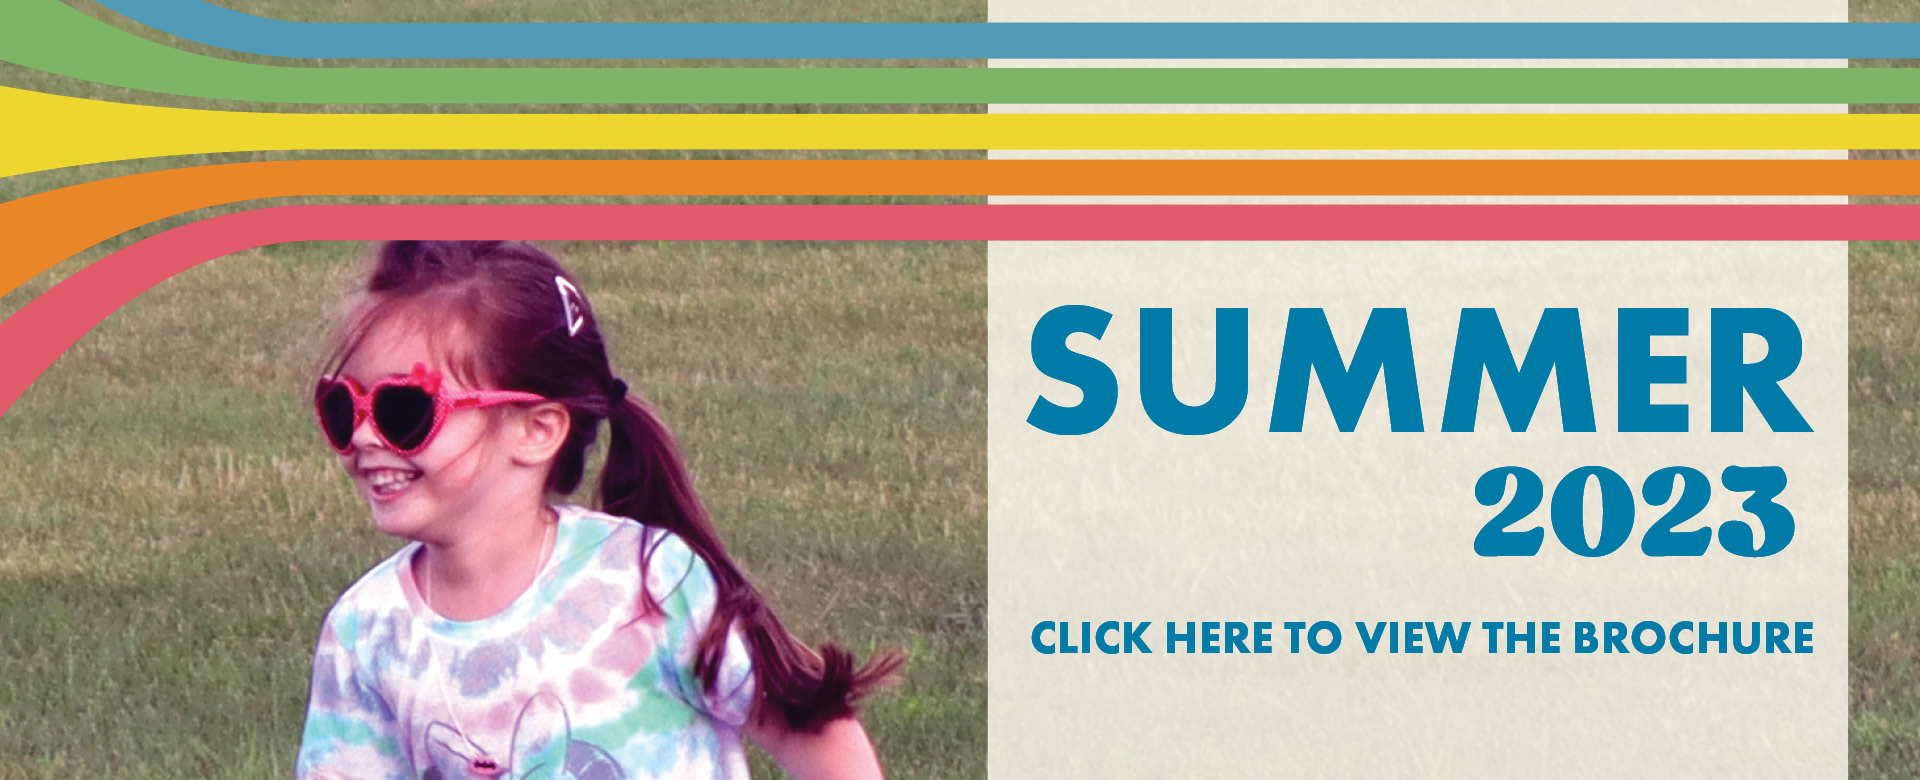 Smiling girl wearing sunglasses running outside. Text: Summer 2023, Click here to view the brochure.